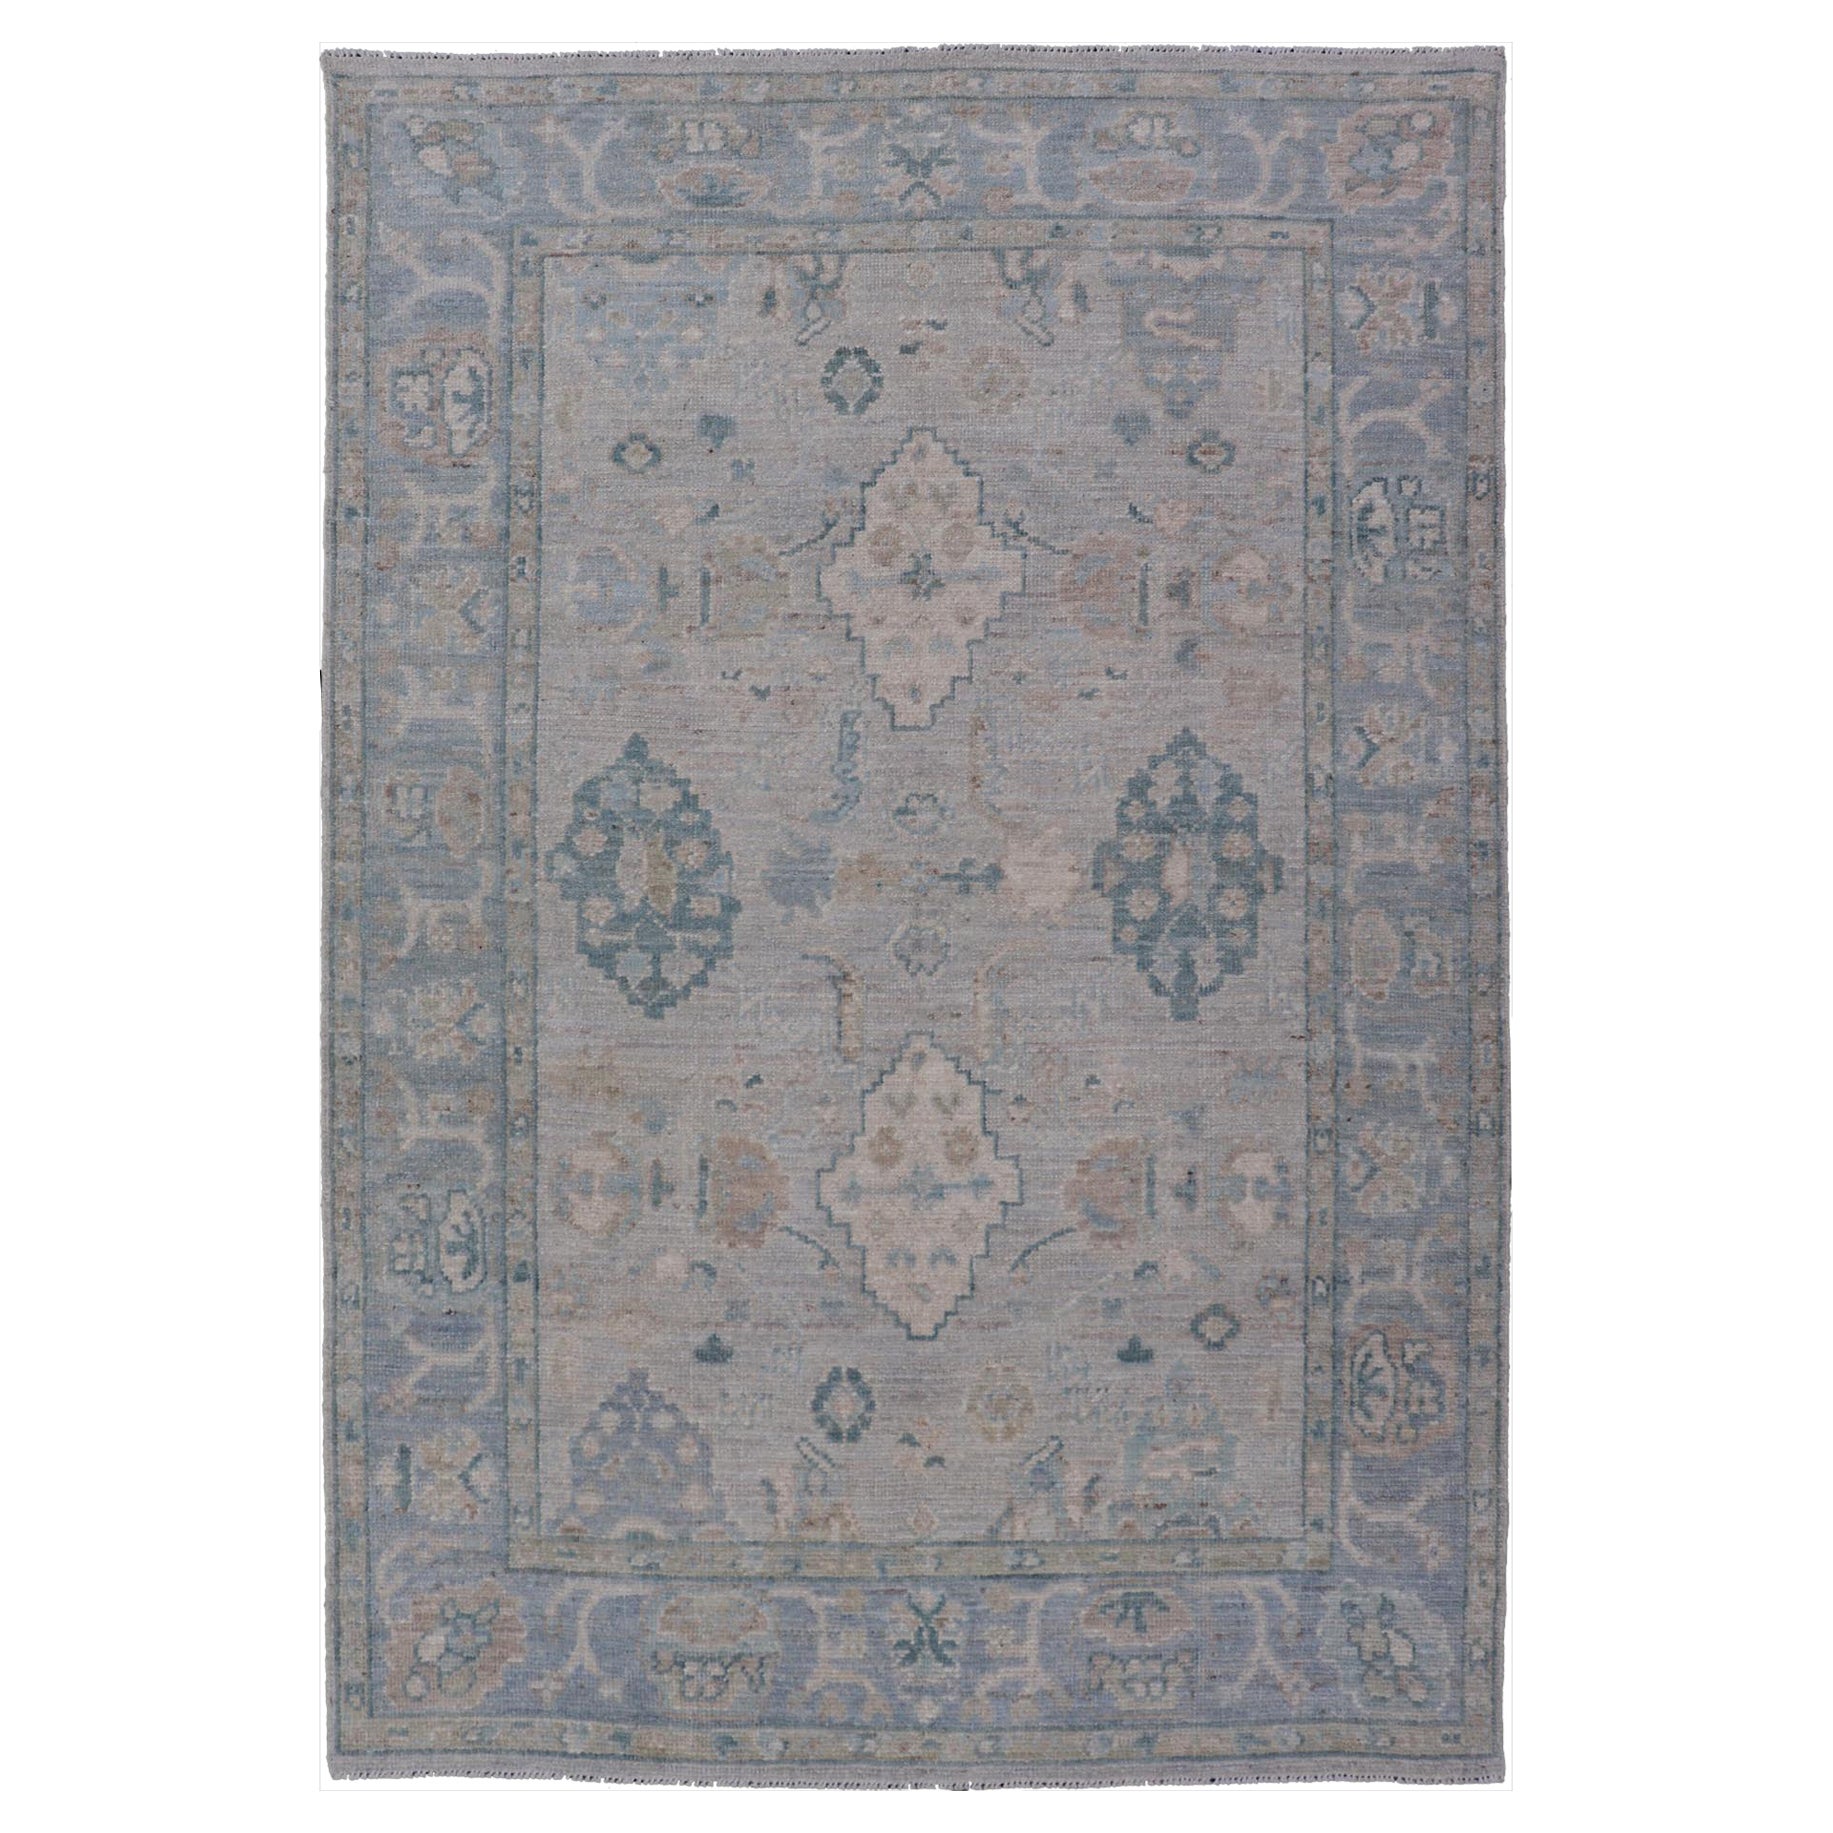 Hand-Knotted Oushak with a Light Blue-Gray Background and Tribal Motifs